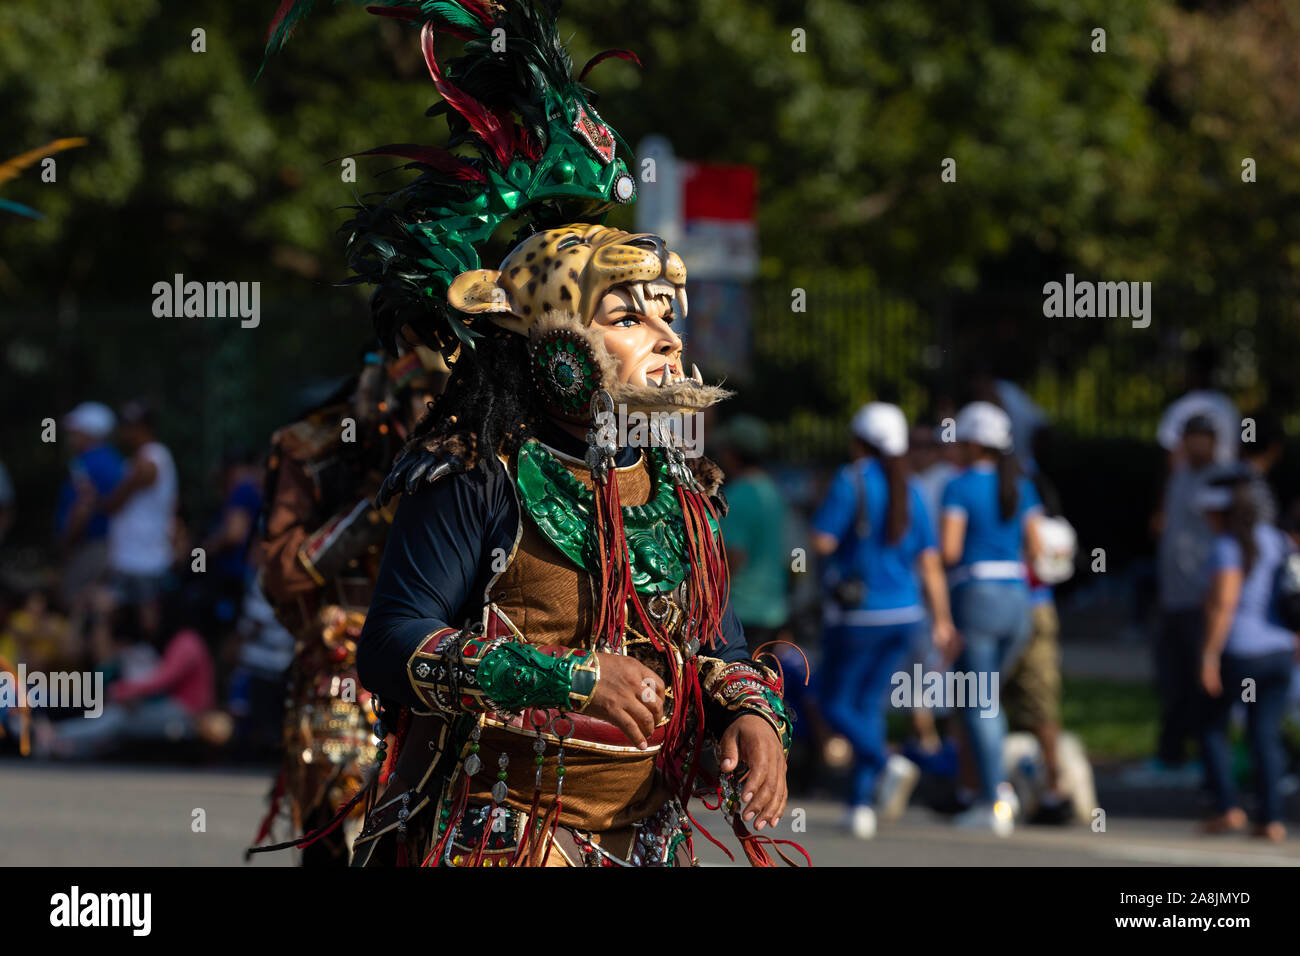 Washington DC, USA - September 21, 2019: The Fiesta DC, The Fiesta DC Parade, guatemalans wearing traditional clothing representing the Indigenous peo Stock Photo